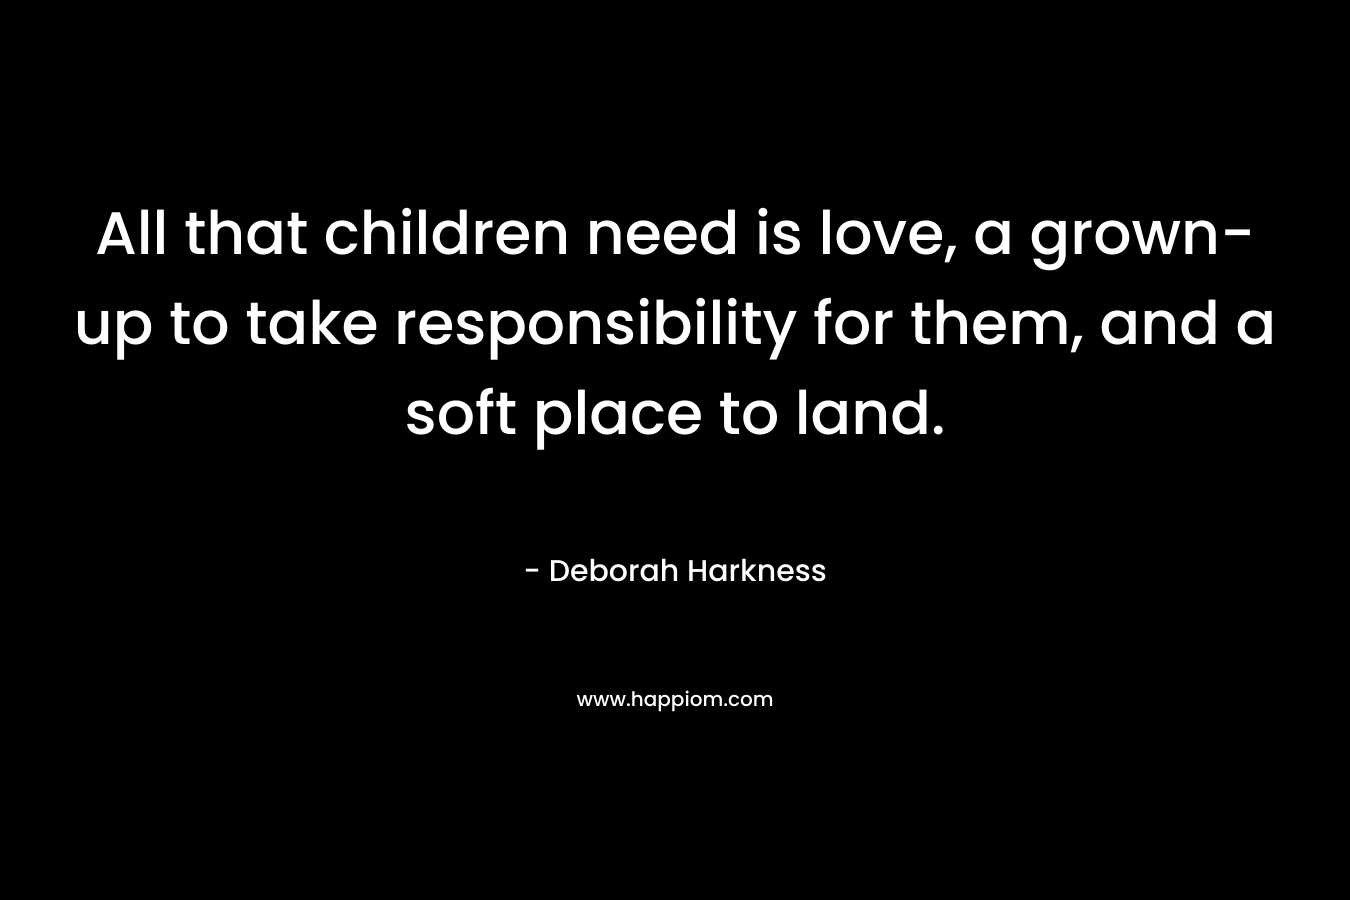 All that children need is love, a grown-up to take responsibility for them, and a soft place to land. – Deborah Harkness